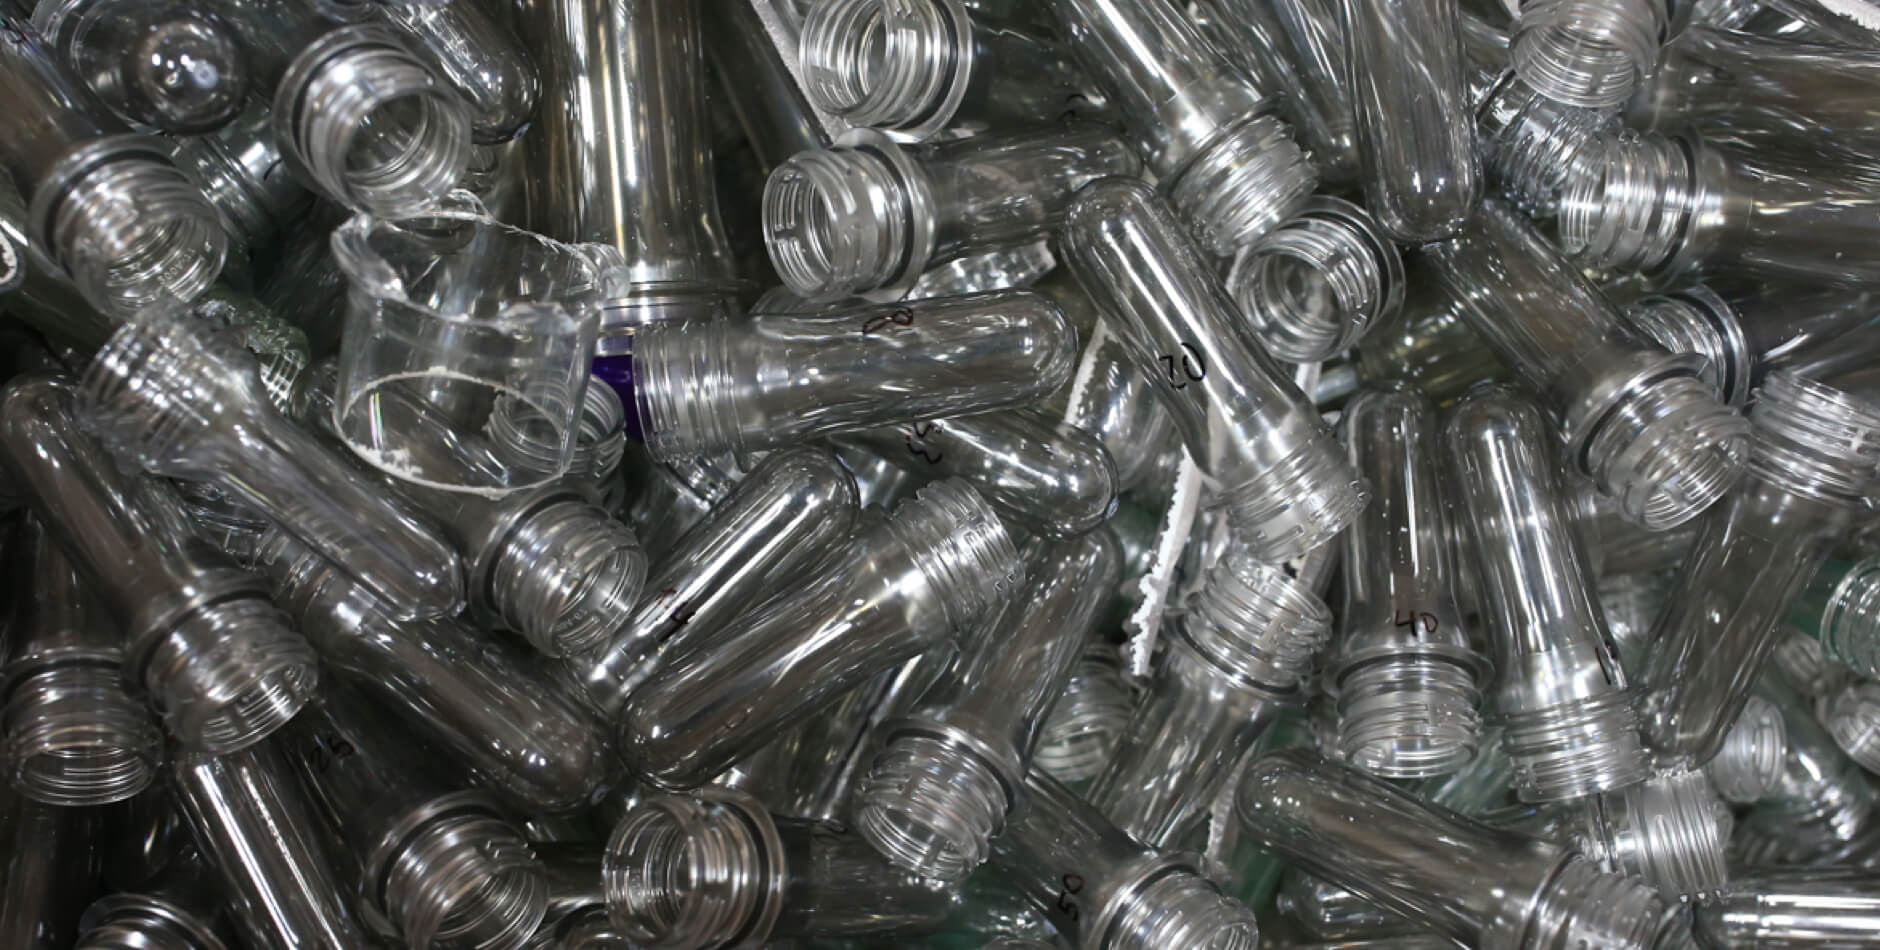 Amber PET Bottles: Recycling Challenges and Opportunities